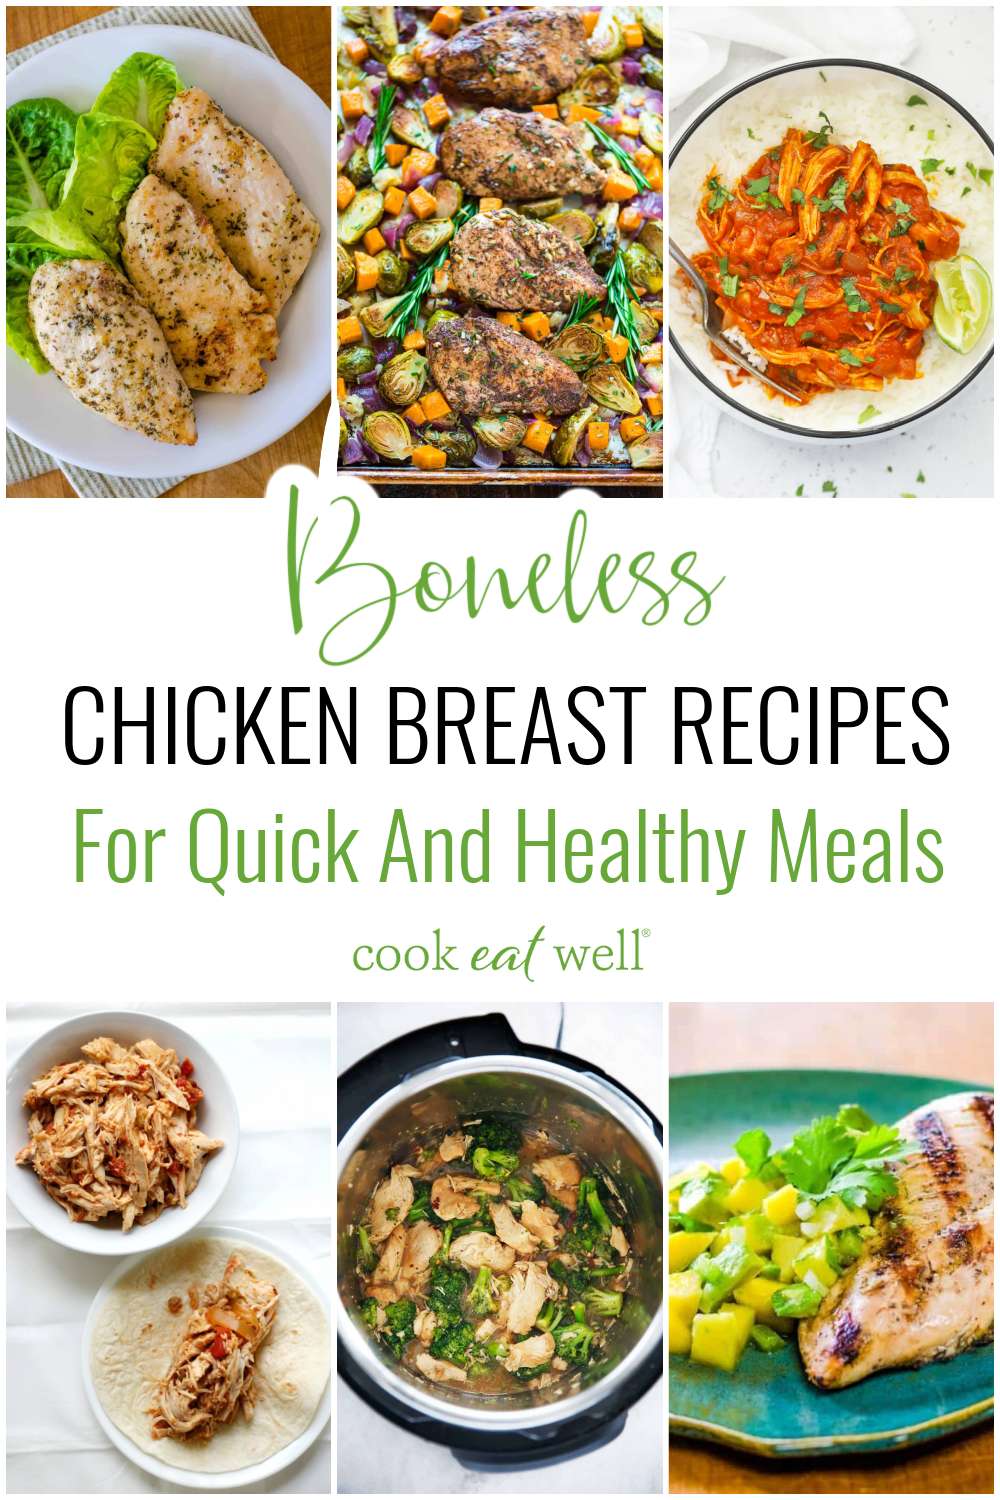 Boneless chicken breast recipes for quick and healthy meals